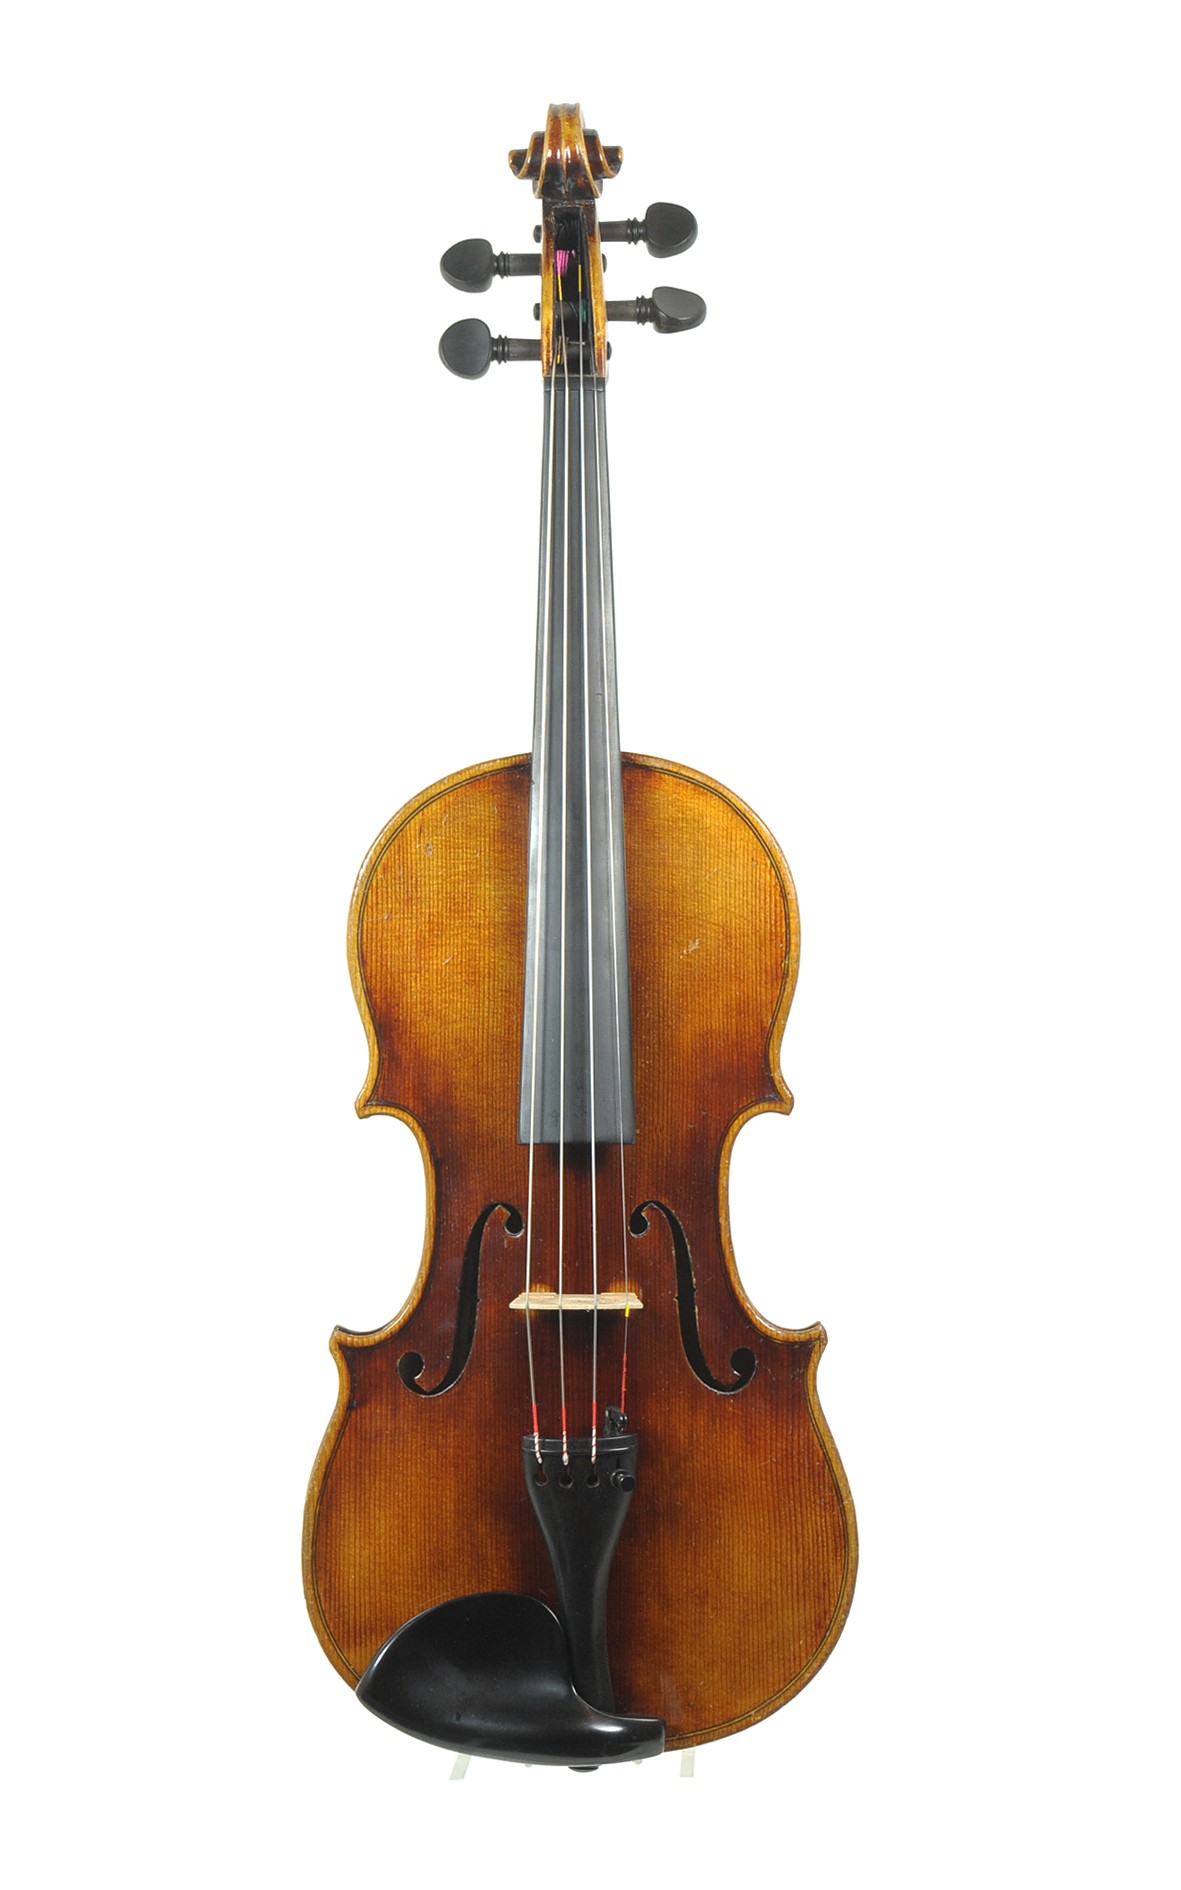 3/4 - German violin after Amati, Boosey & Hawkes, approx. 1920 - top view